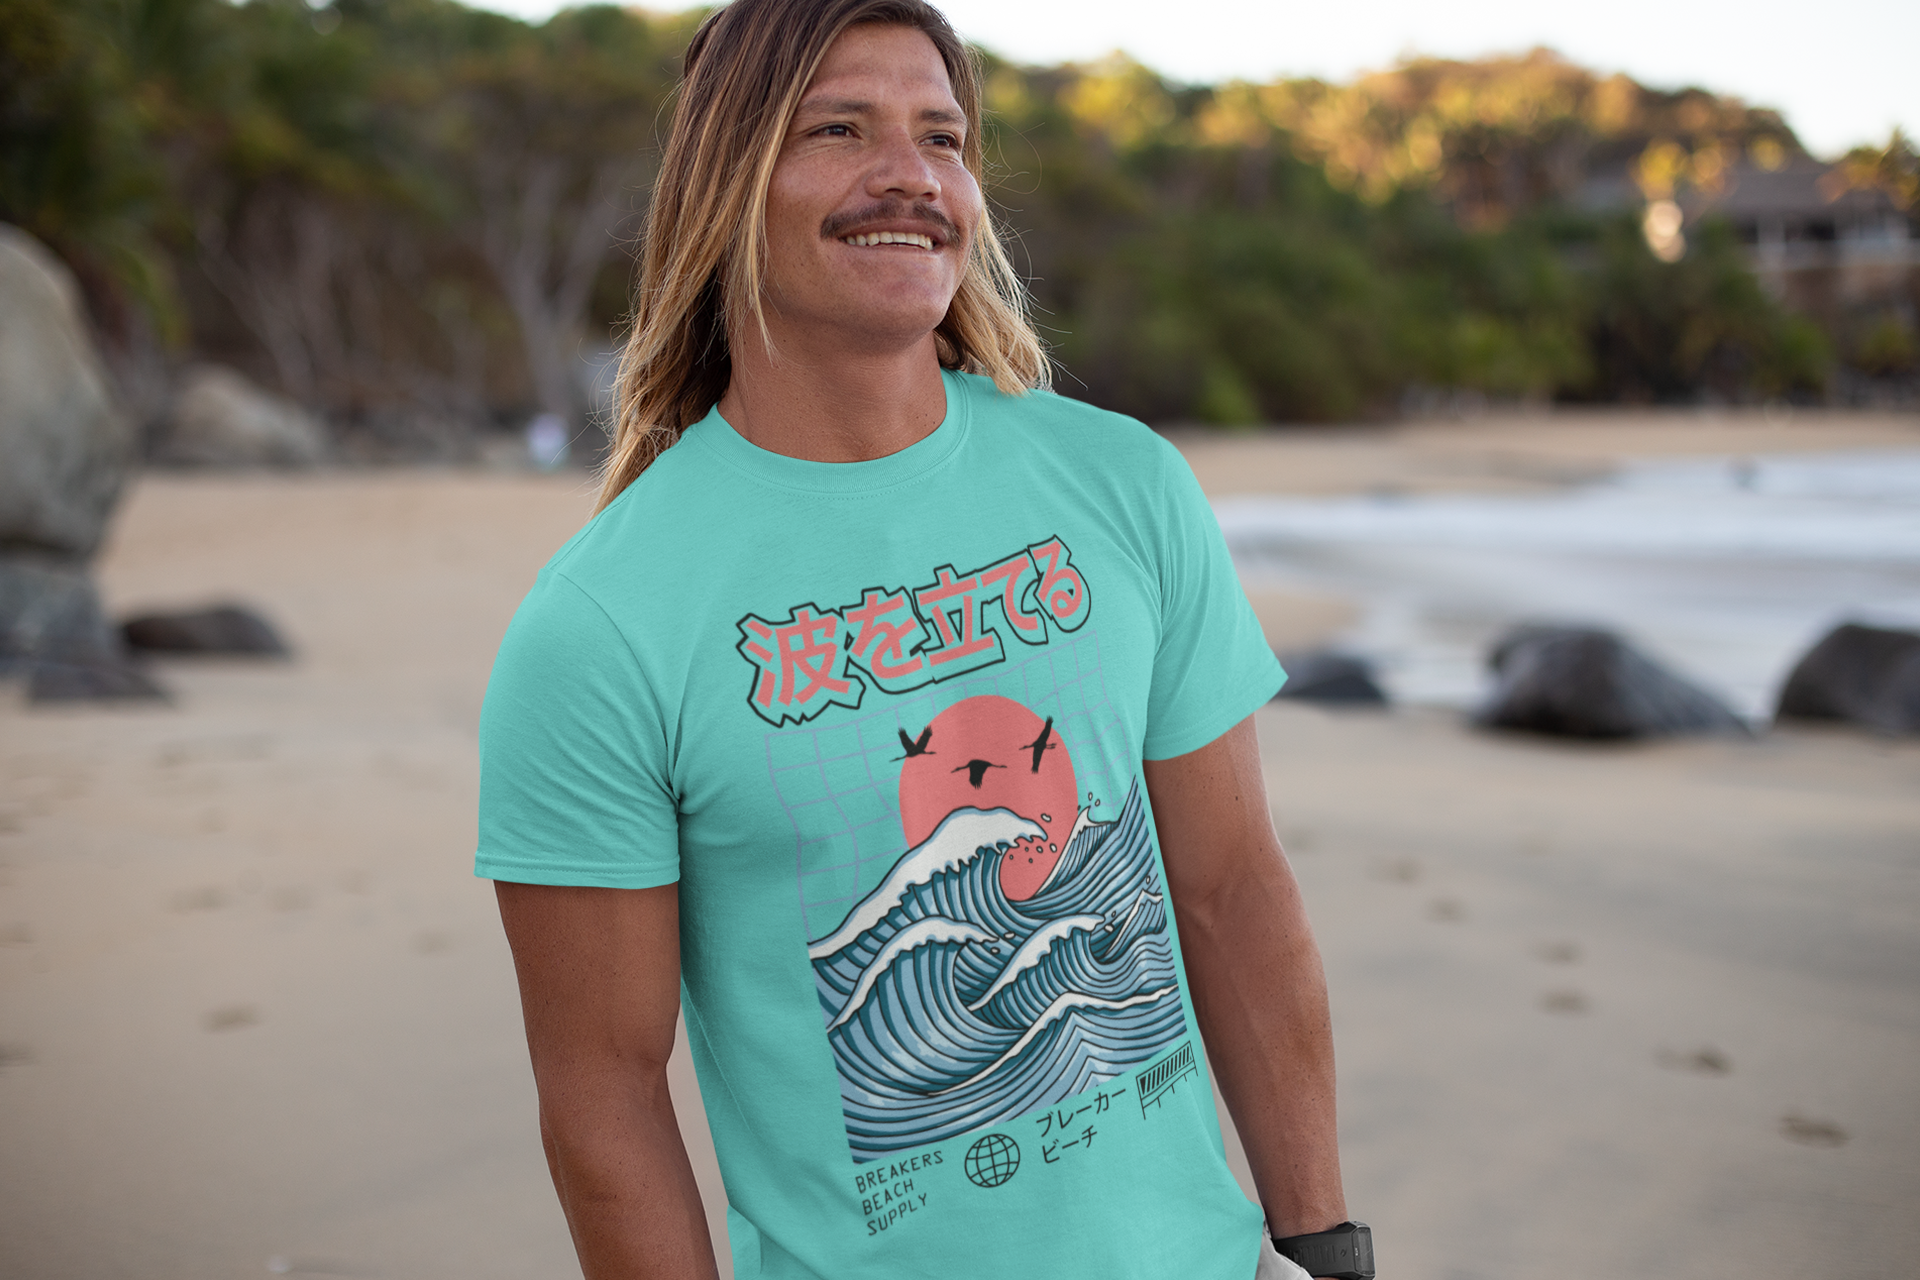 At Breakers Beach Supply, we strive to provide high-quality products and apparel that embody the spirit of the water. 